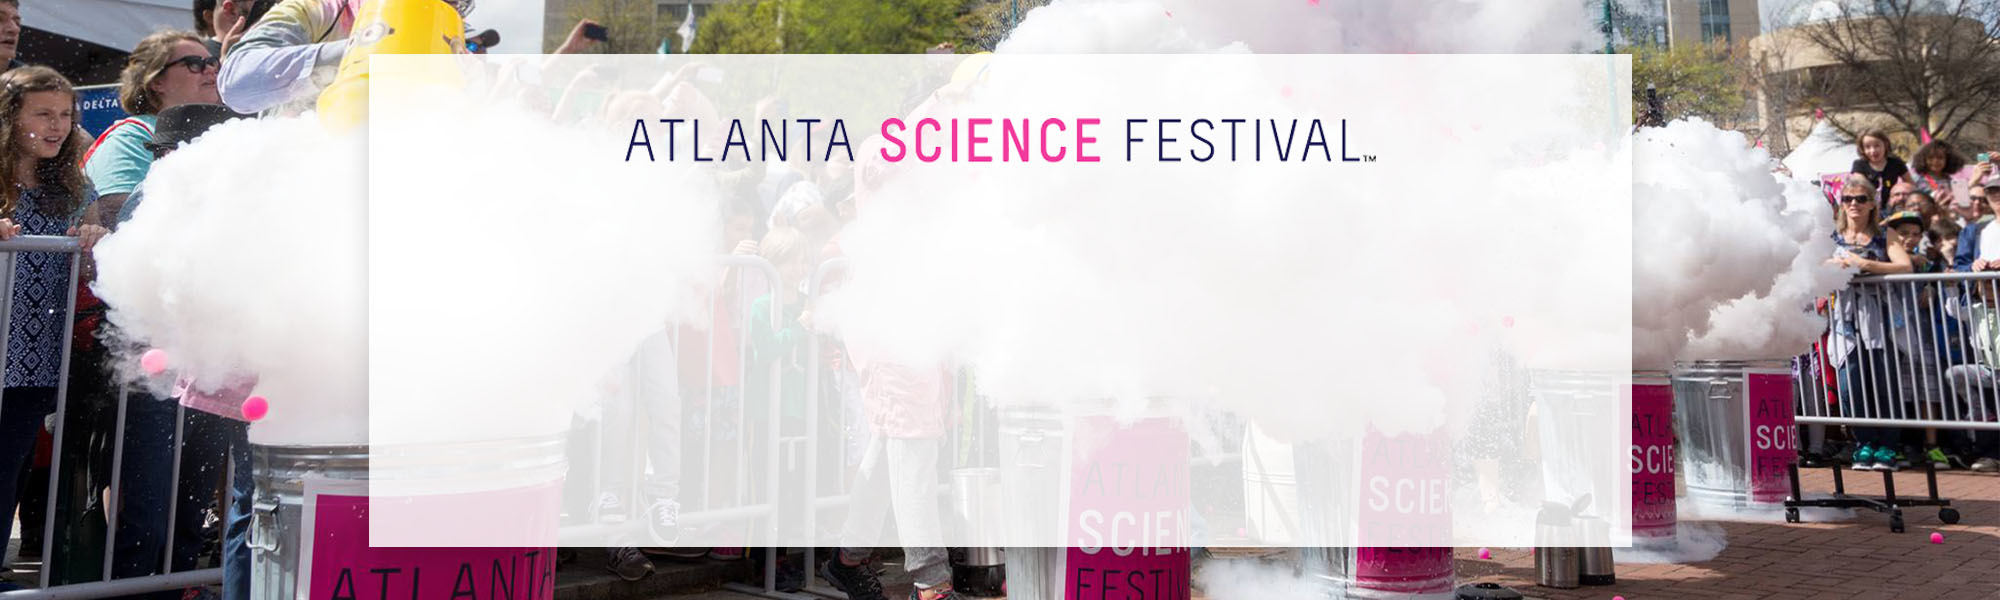 Atlanta Science Festival with a background image of the expo